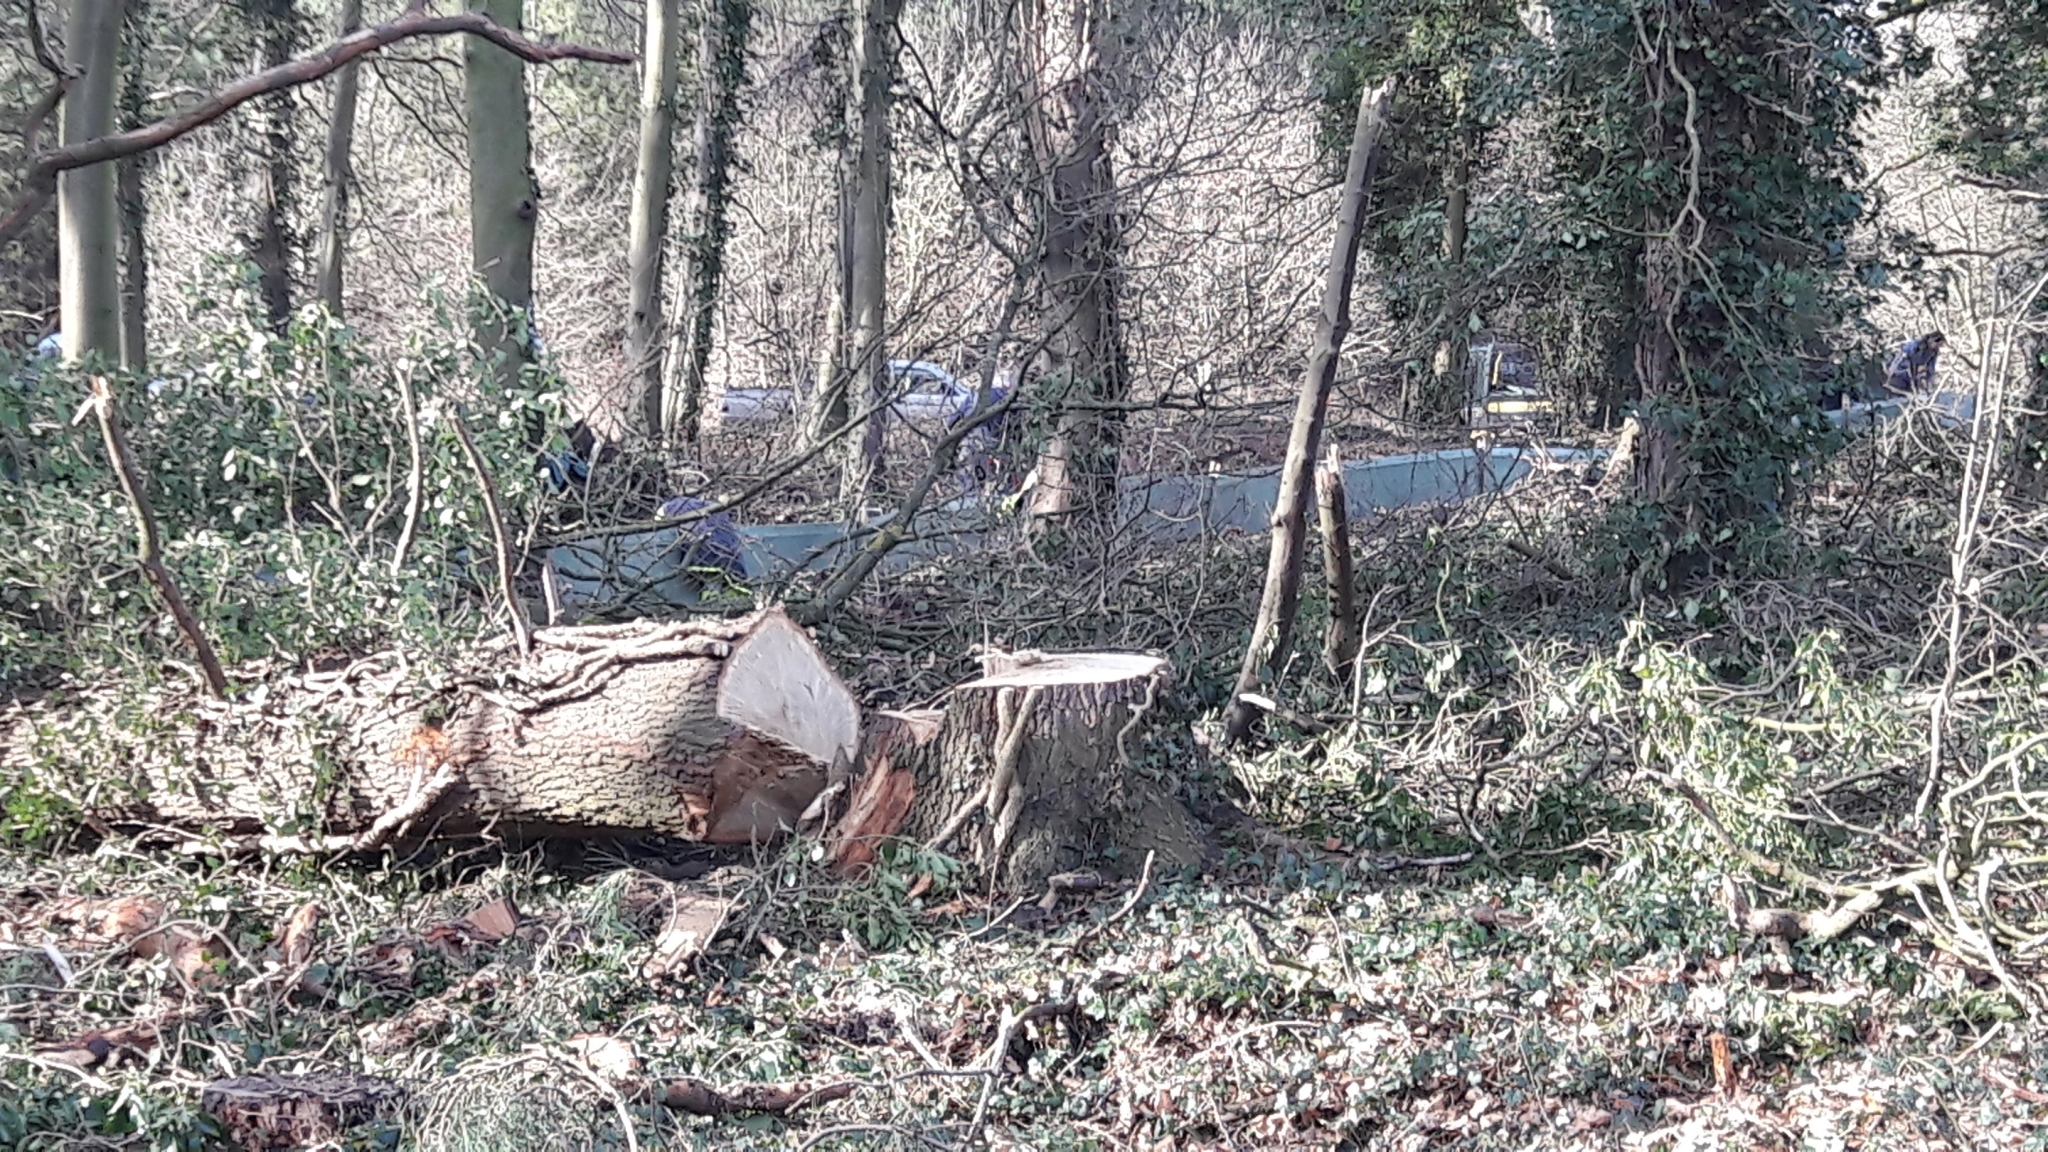 A photo from the FoTF Conservation Event - February 2018 - Erecting the Toad Fence at Cranwich : A tree stump, with a section of erected fence in the background